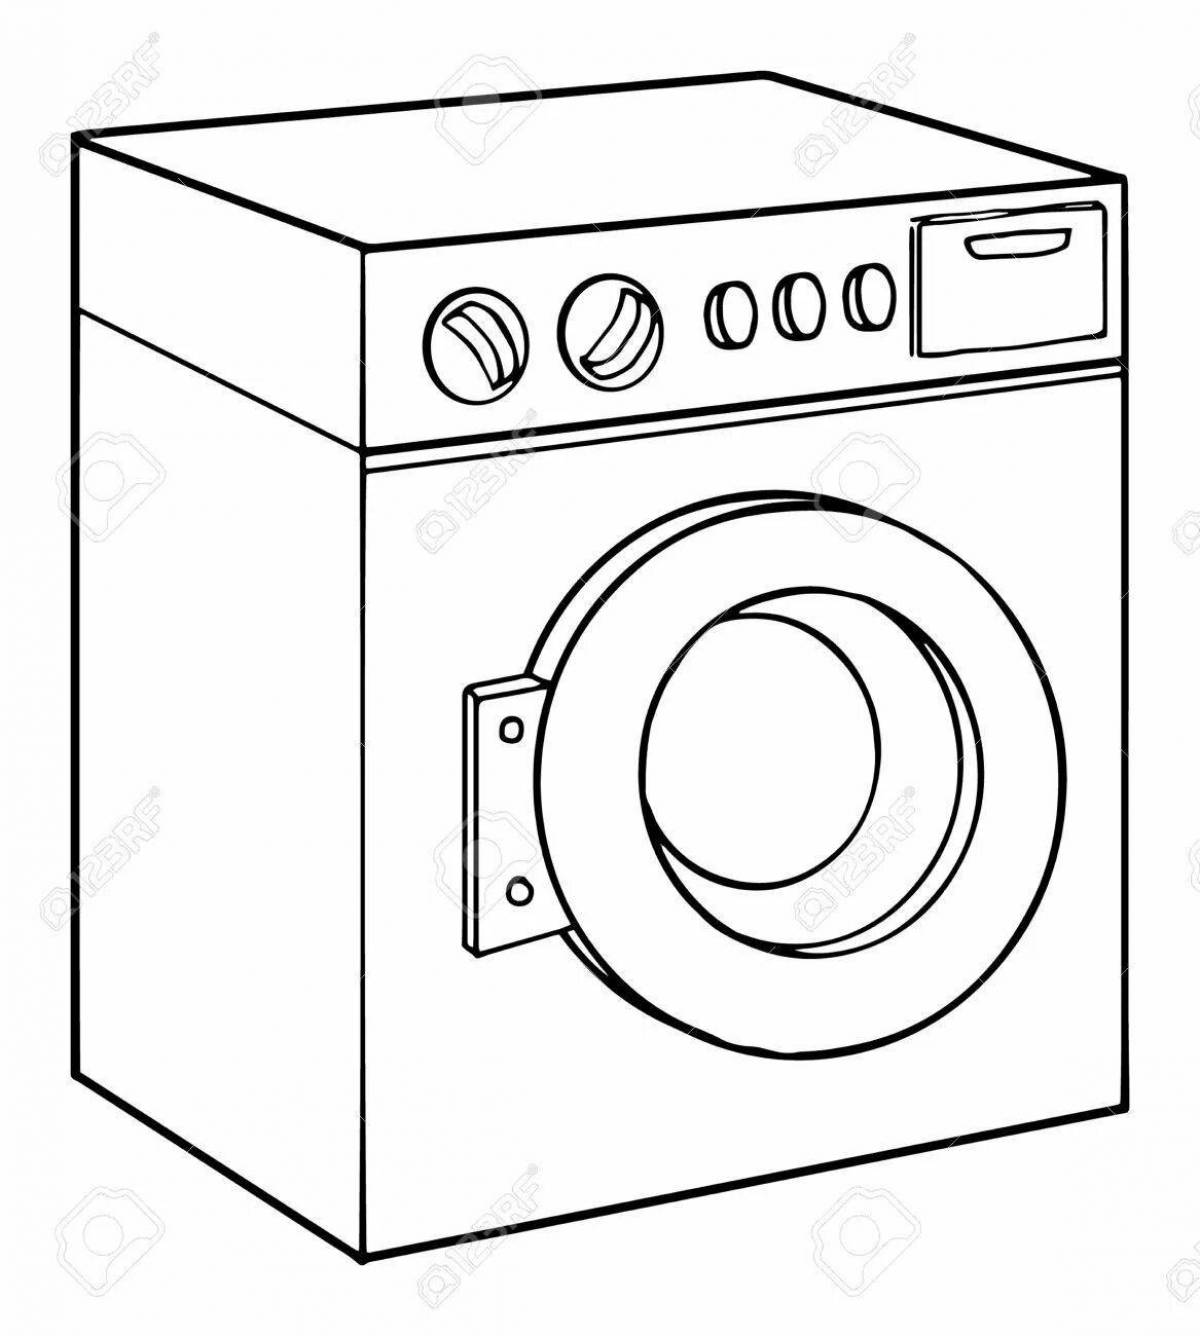 Incredible coloring of the washing machine for the little ones